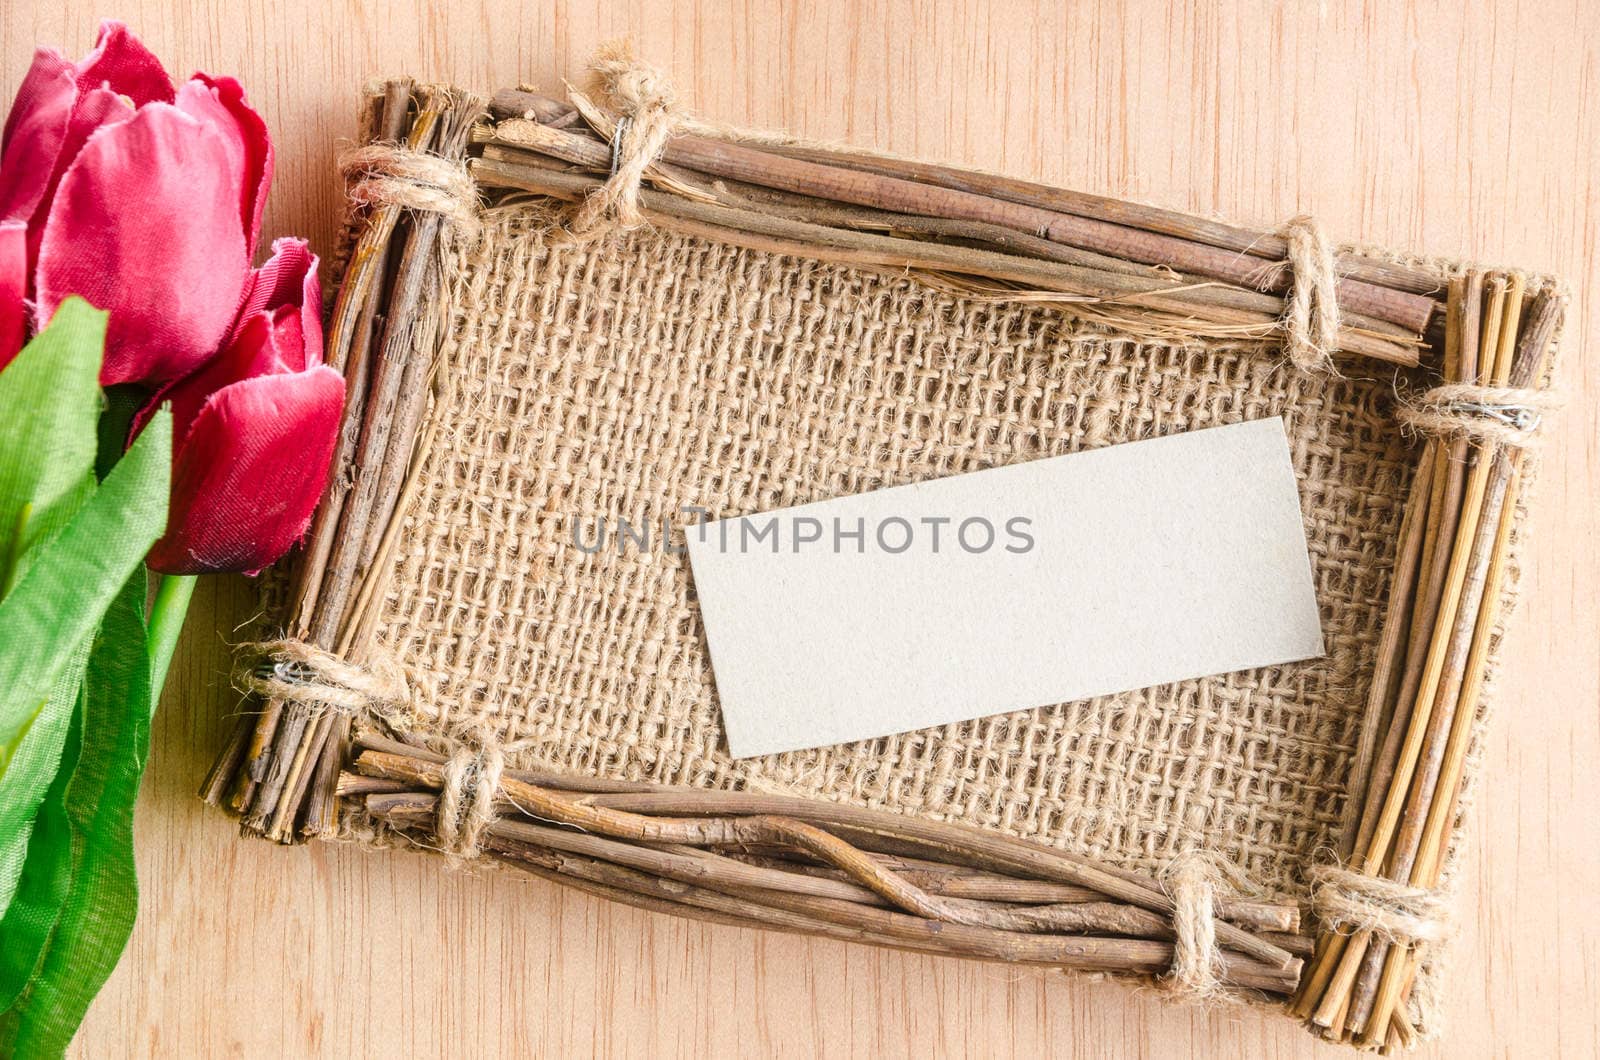 Tulips with a card on a wooden background